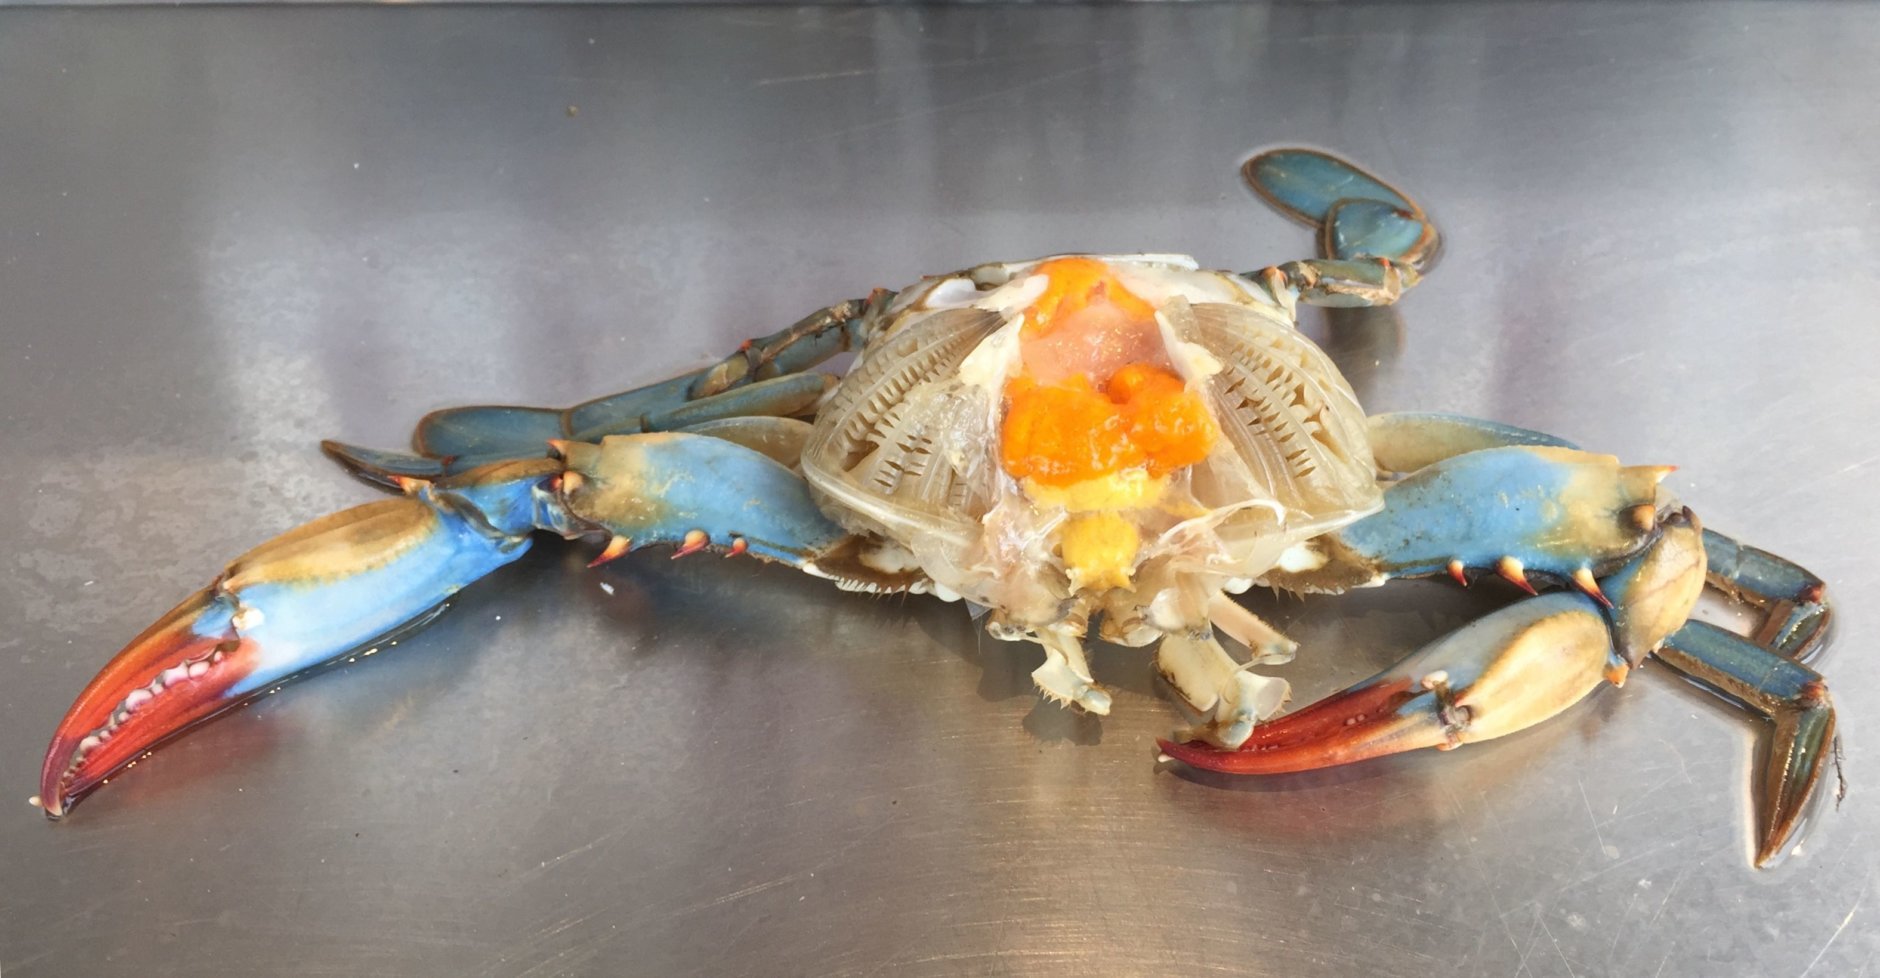 The orange stuff inside this female crab are eggs that some people find a delicacy. (WTOP/Kristi King)